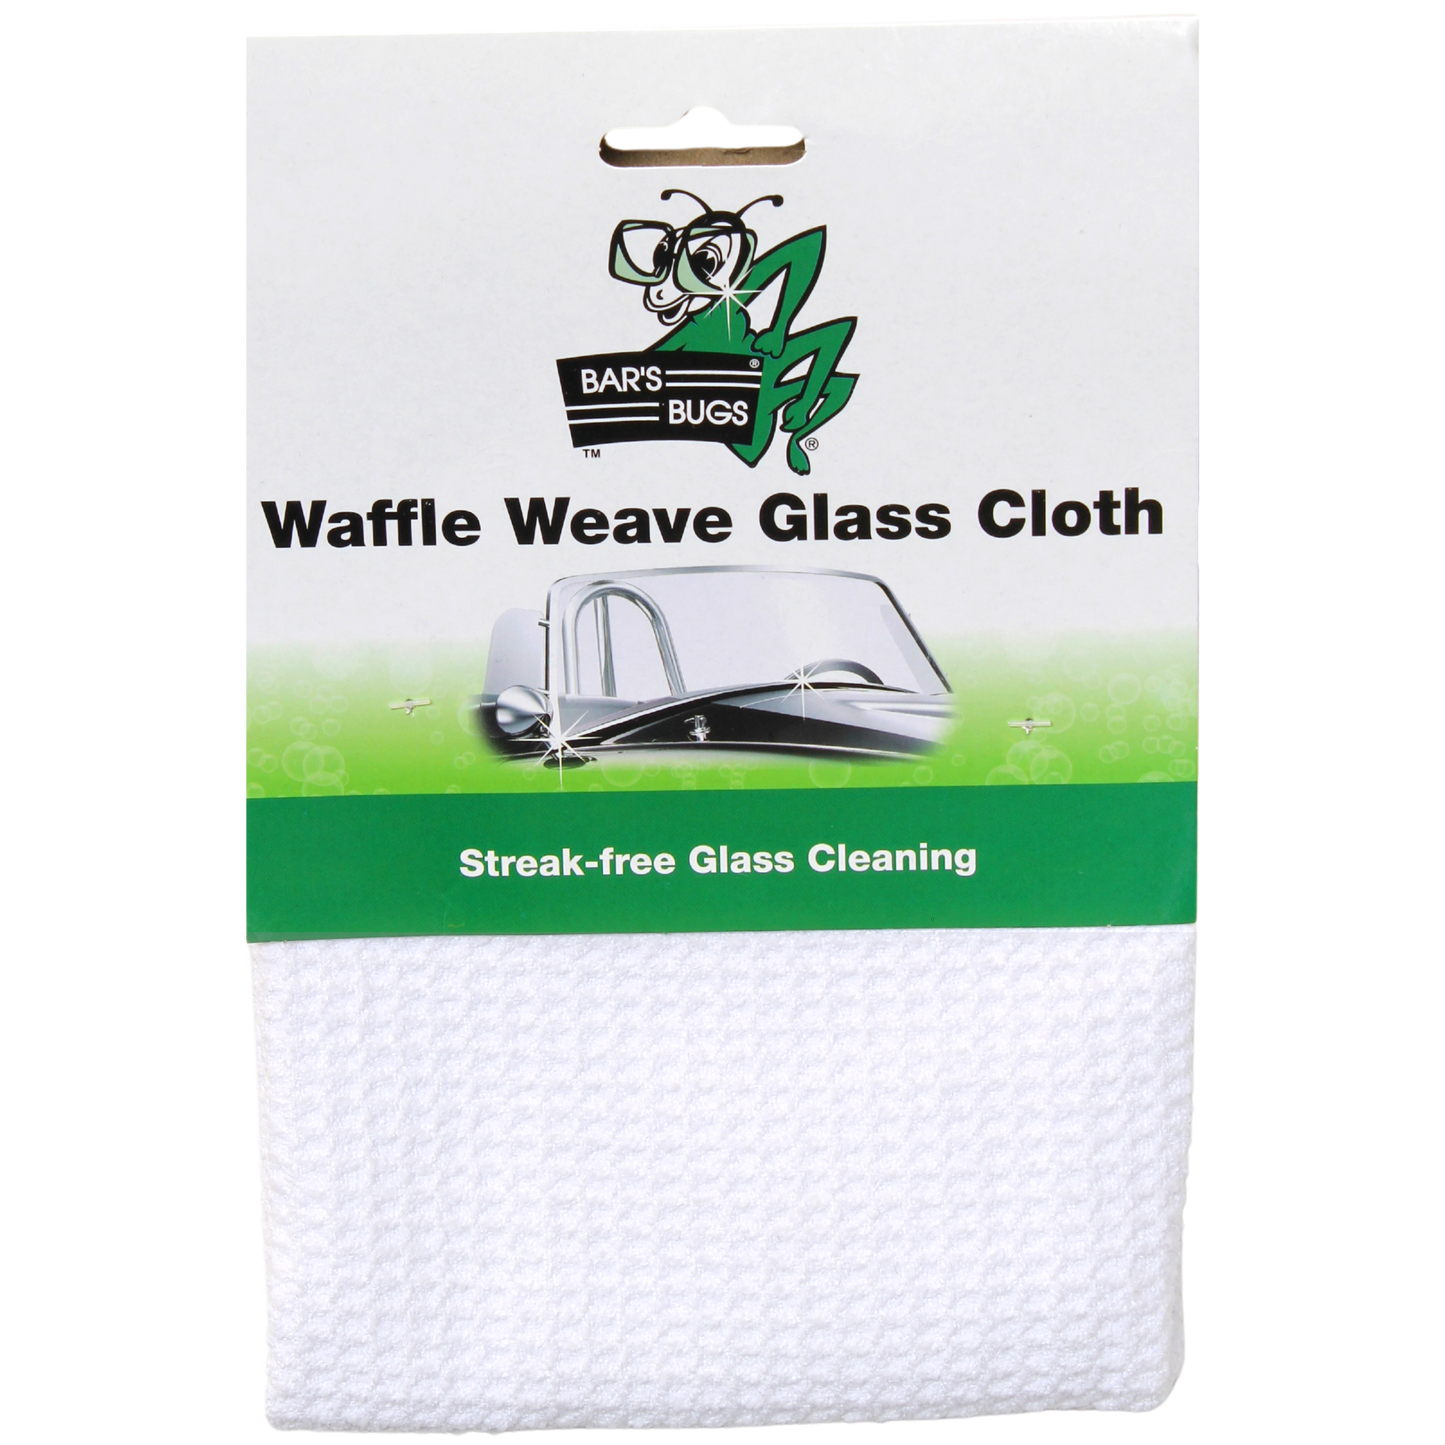 Bar's Bugs Waffle Weave Glass Cloth for Glass & Windscreen Cleaning